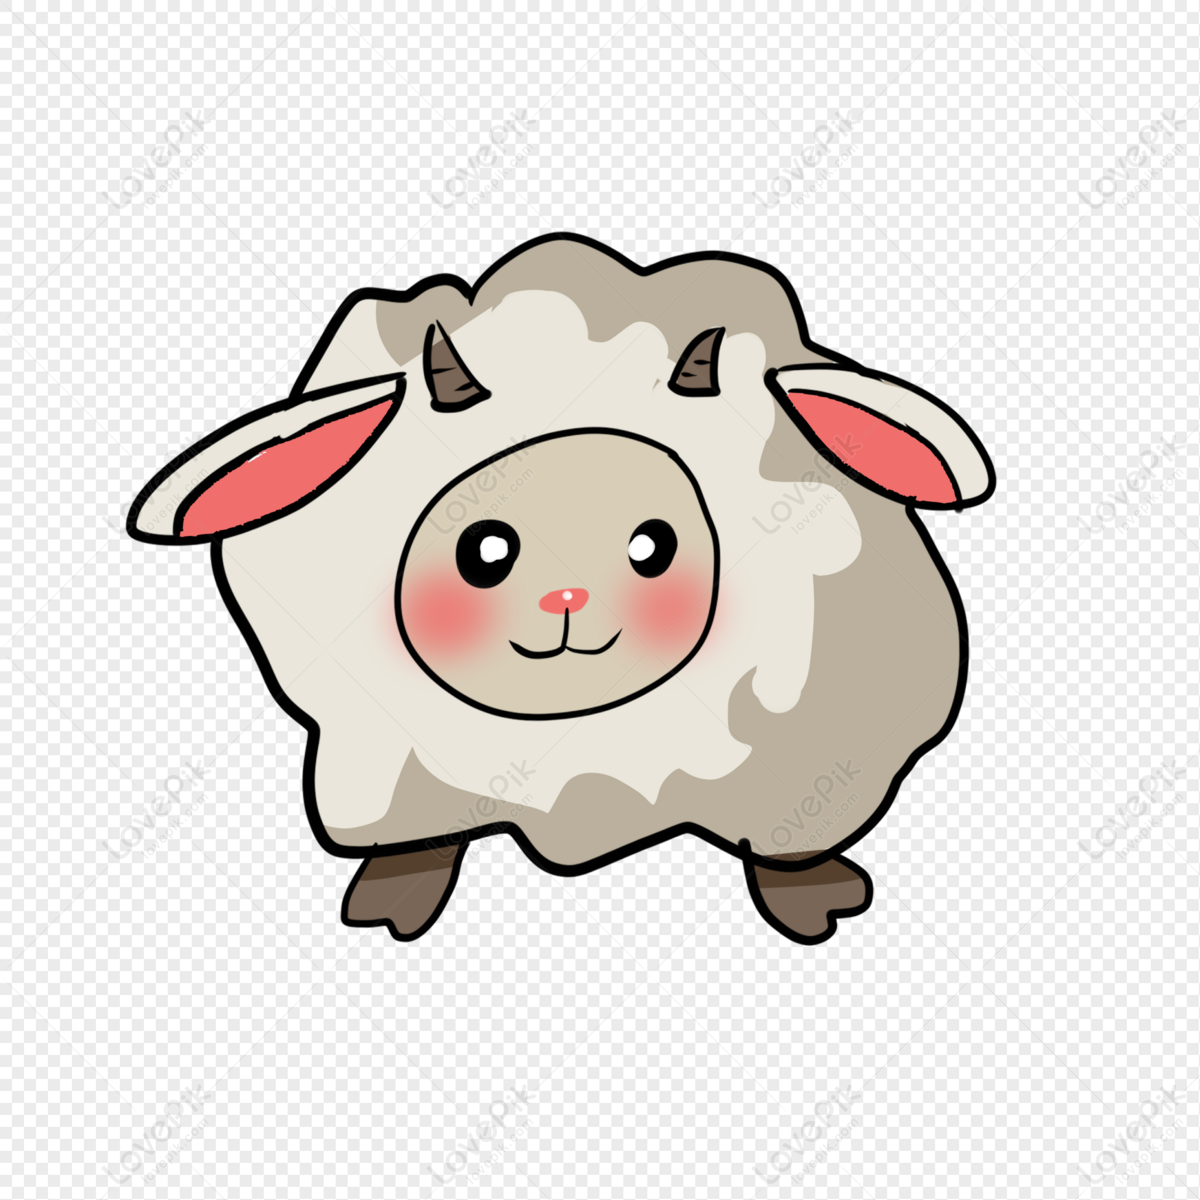 Little Sheep PNG Hd Transparent Image And Clipart Image For Free Download -  Lovepik | 401341794